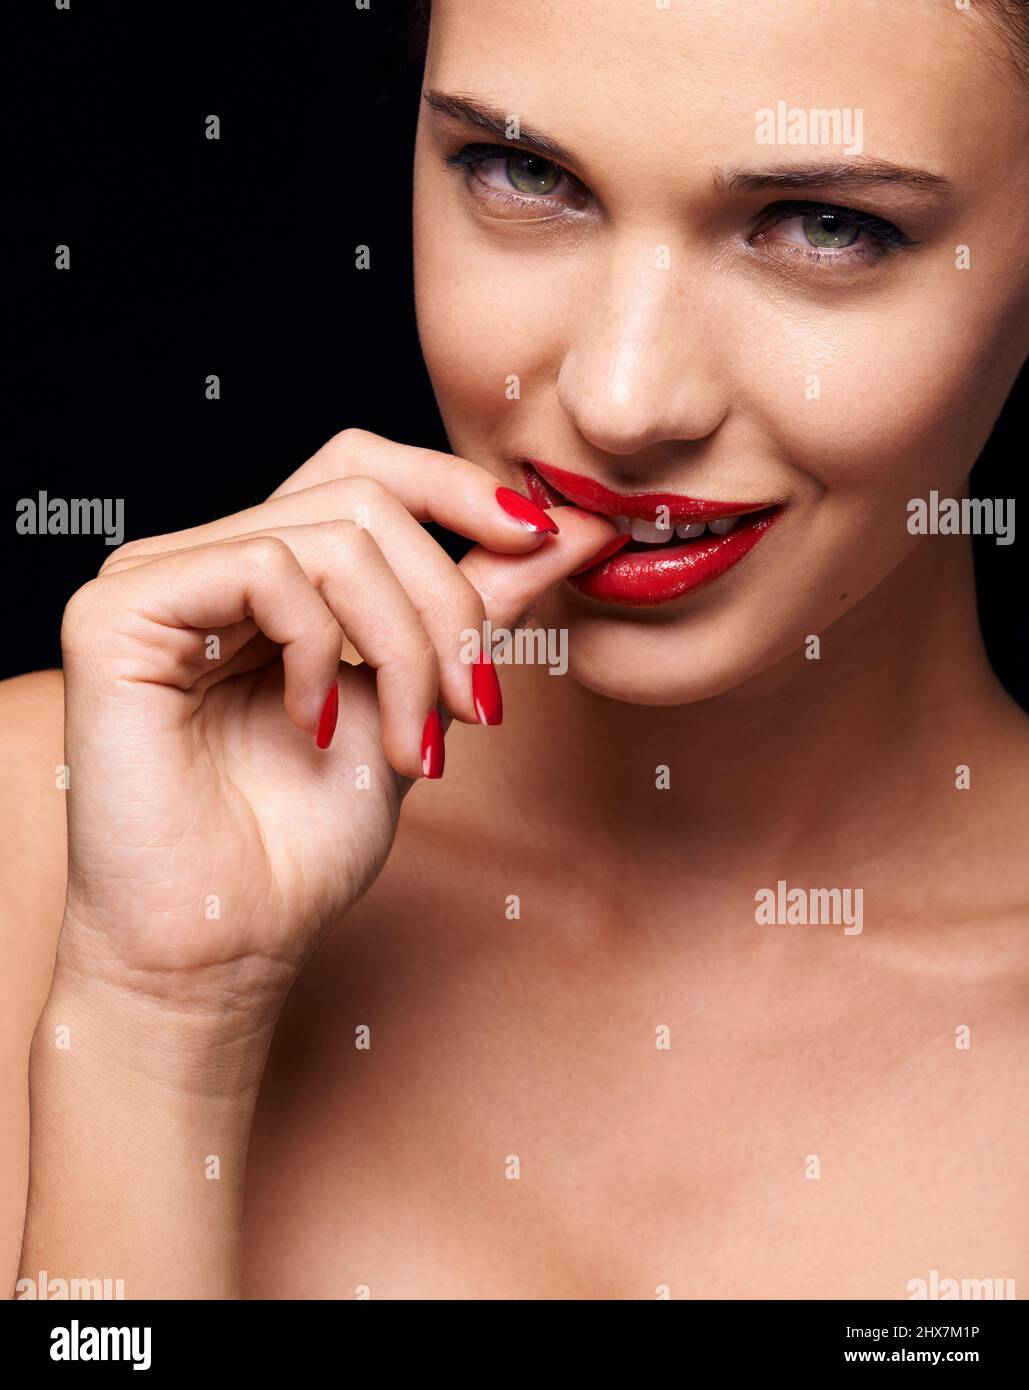 Ravenous red. A young woman with red lips and nails. Stock Photo